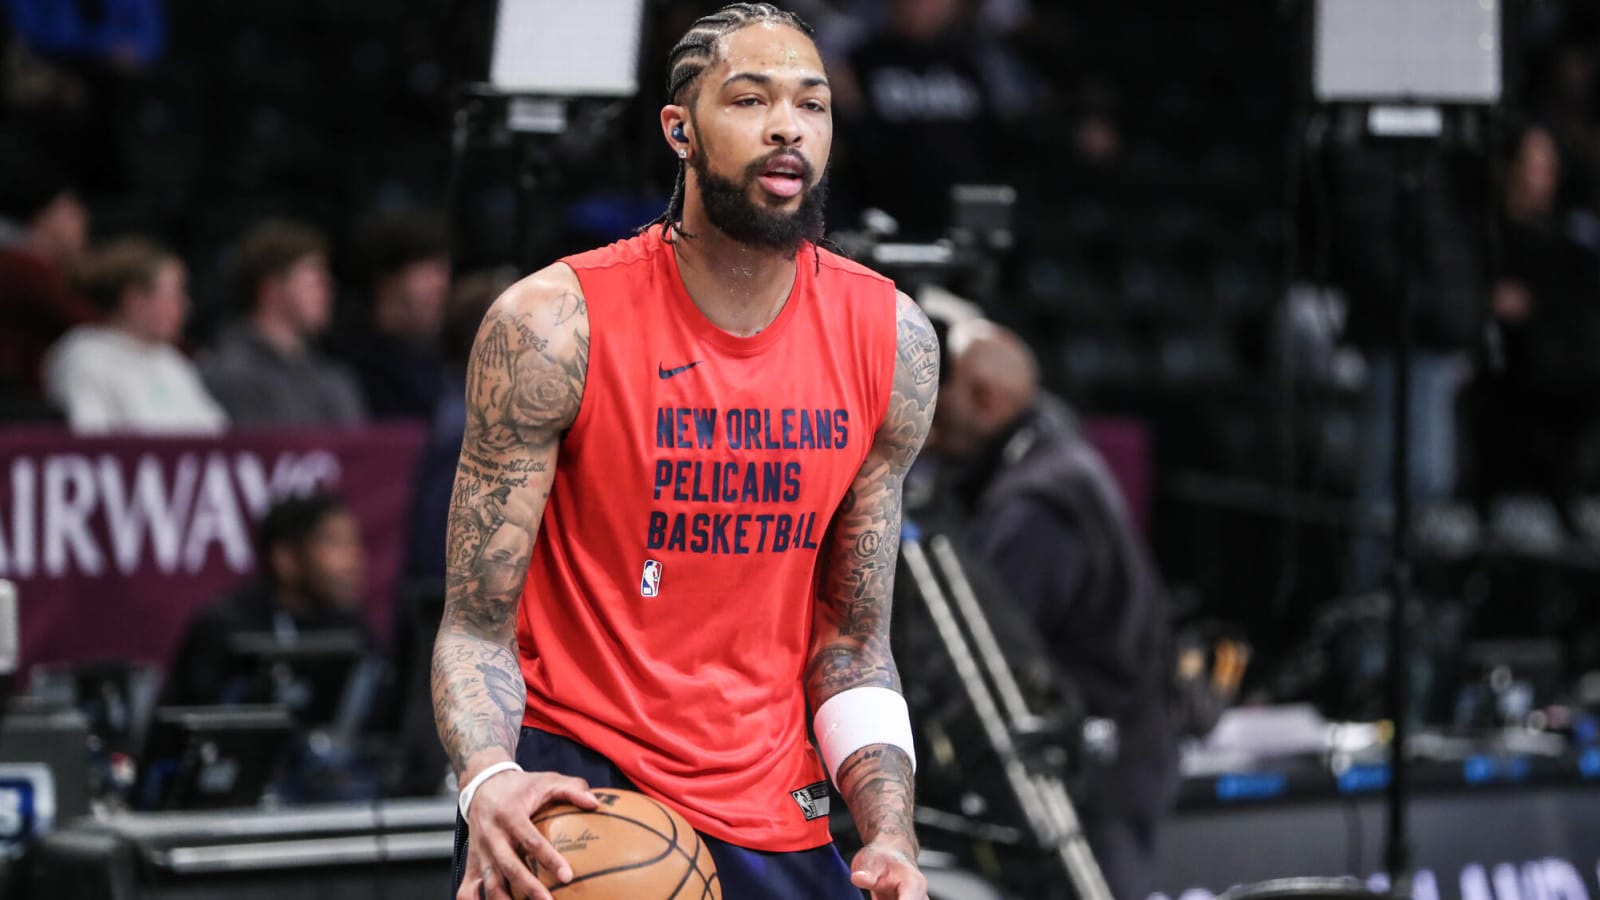 Proposed Trade Sees Heat Acquire Brandon Ingram From Pelicans